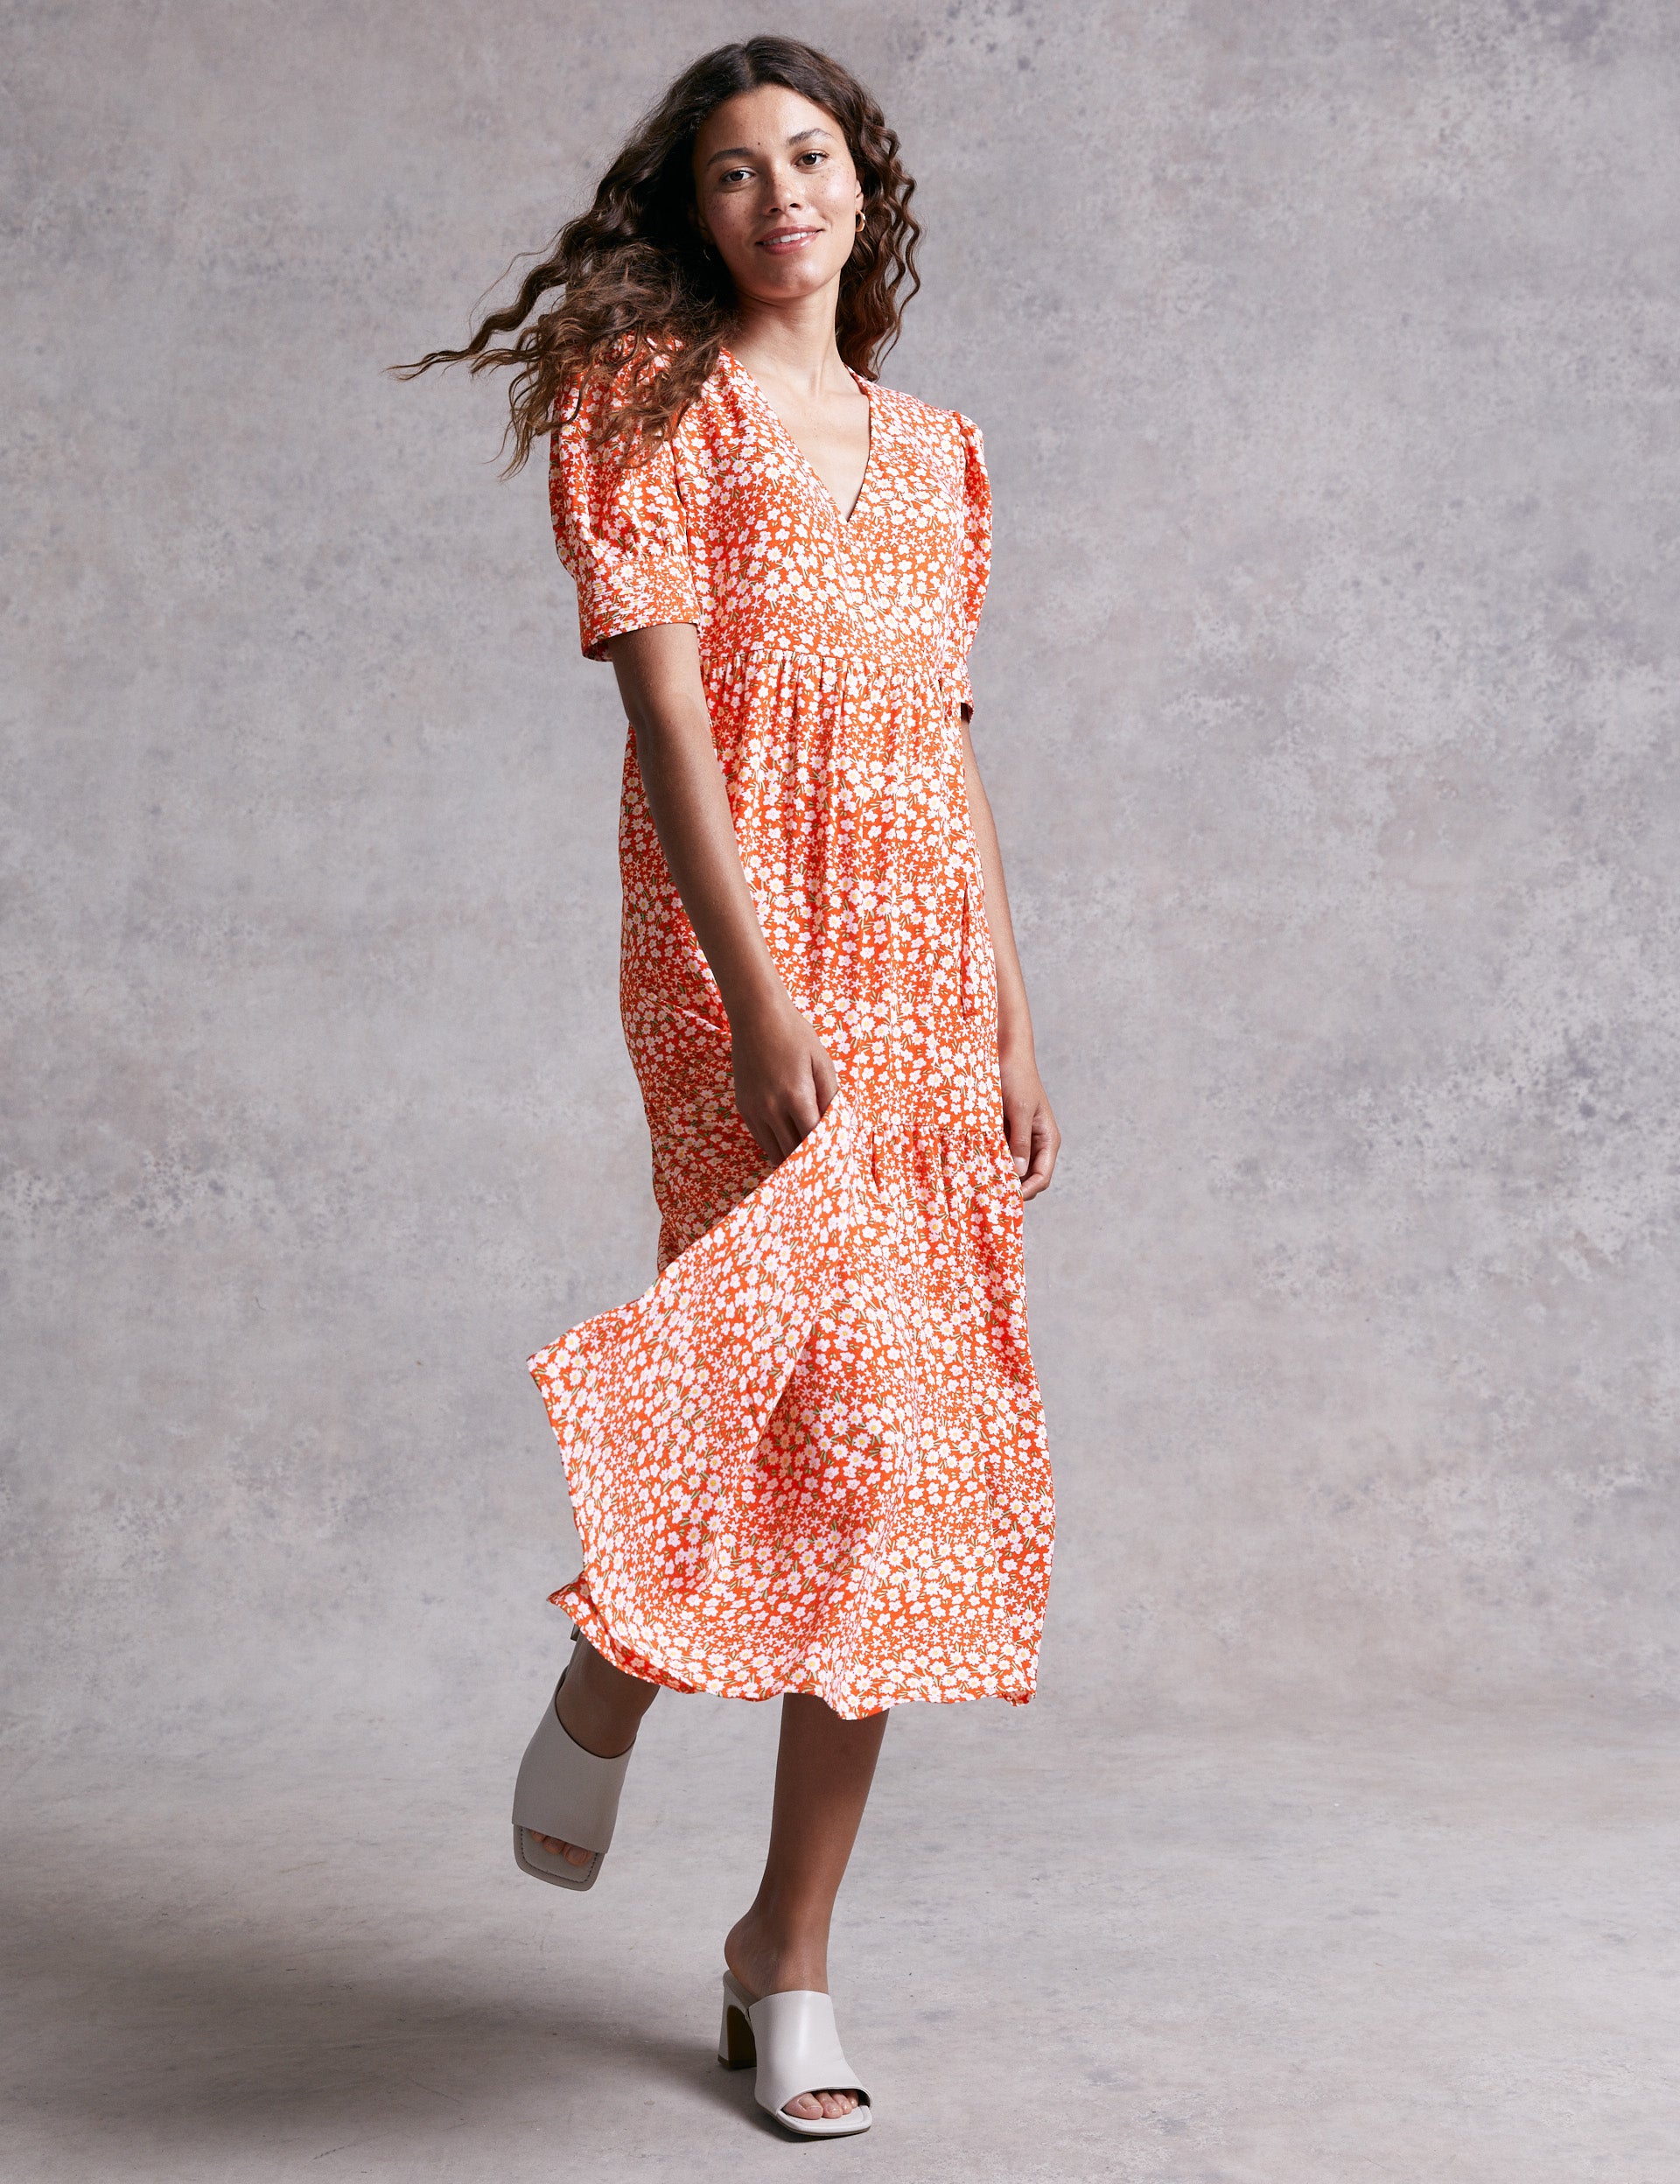 M&S X Ghost Ditsy Floral Wrap Midi Dress product image